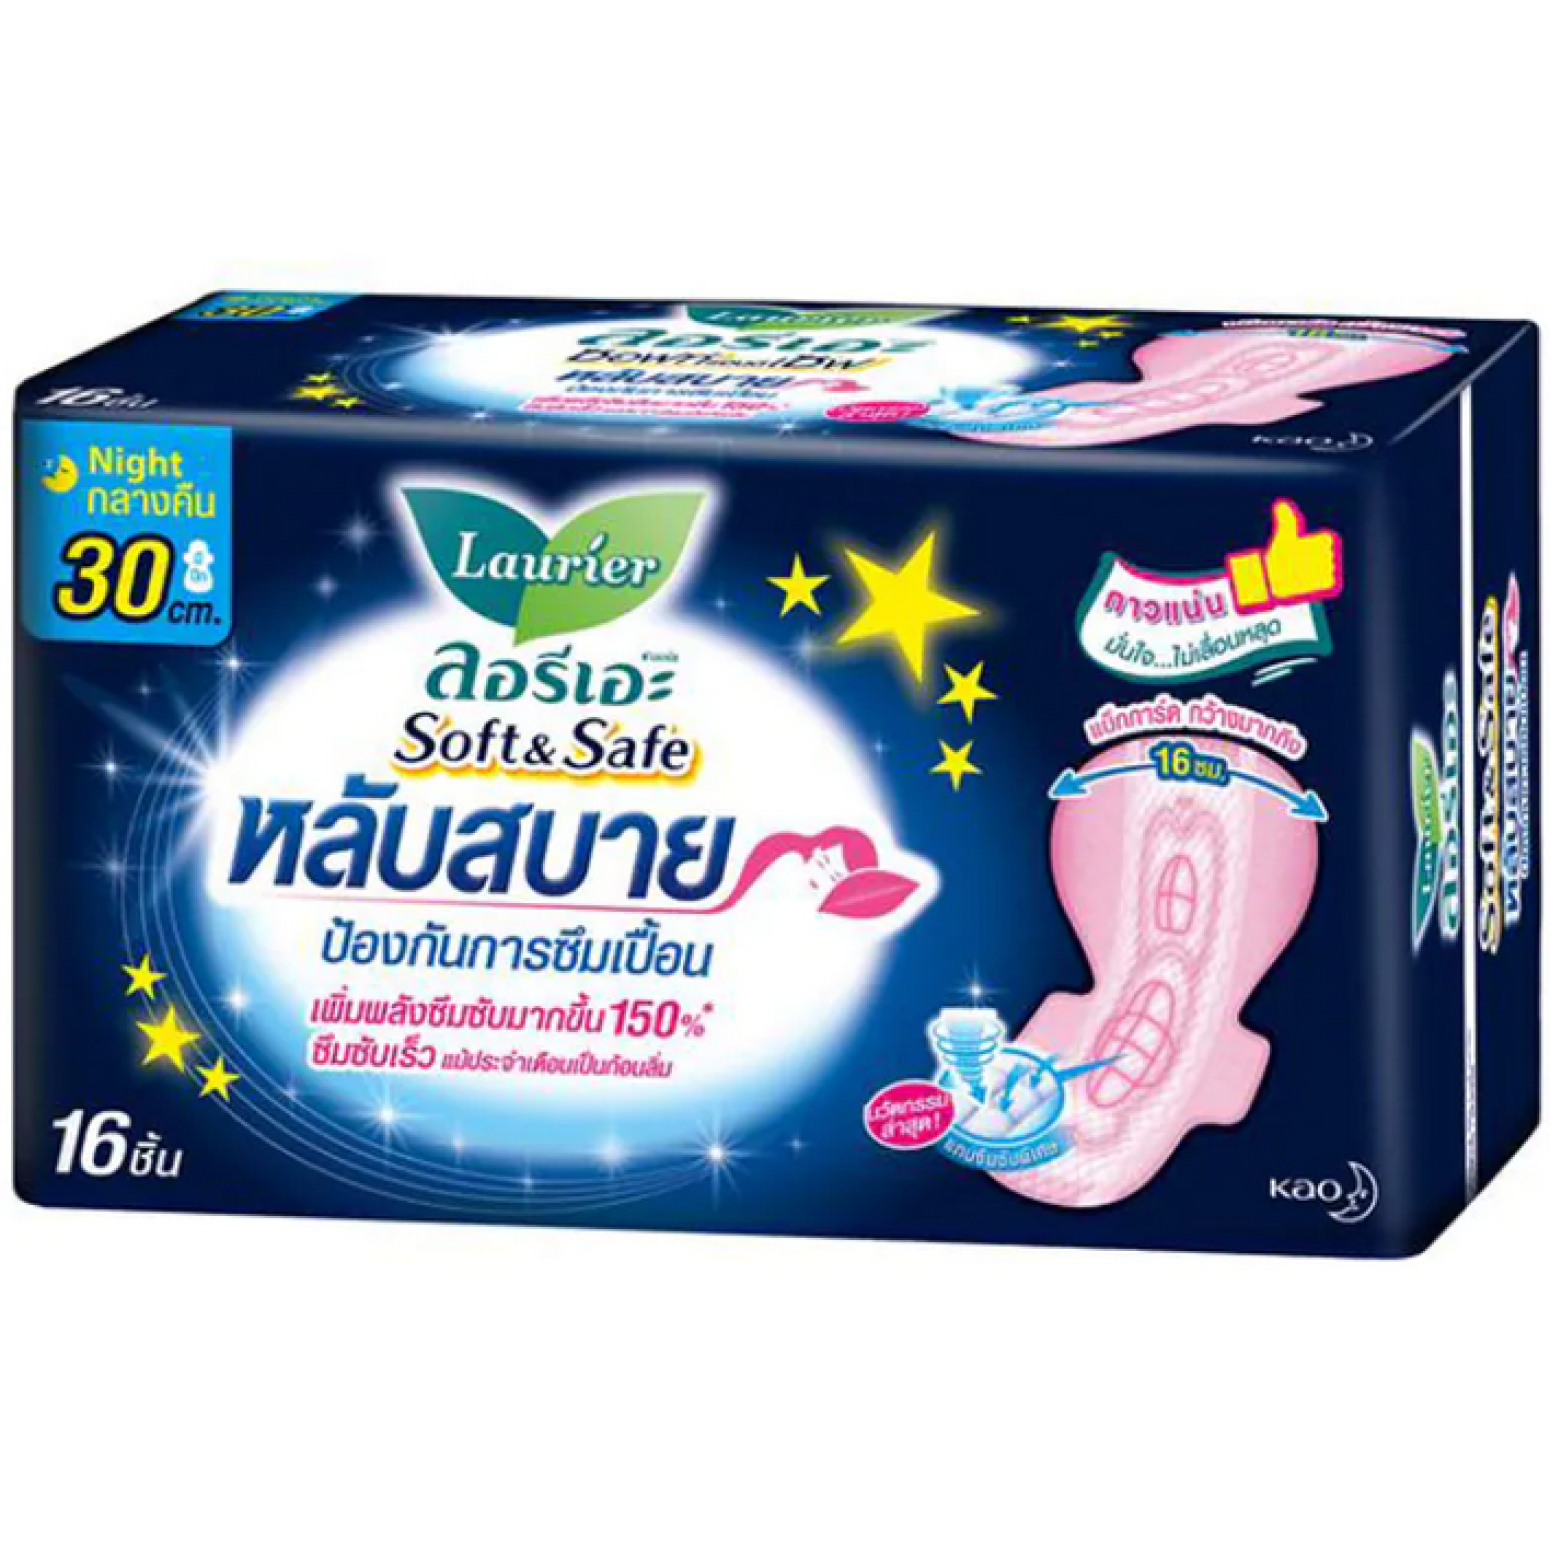 Laurier Sanitary Napkin Soft and Safe Night Wing 30cm 16pcs